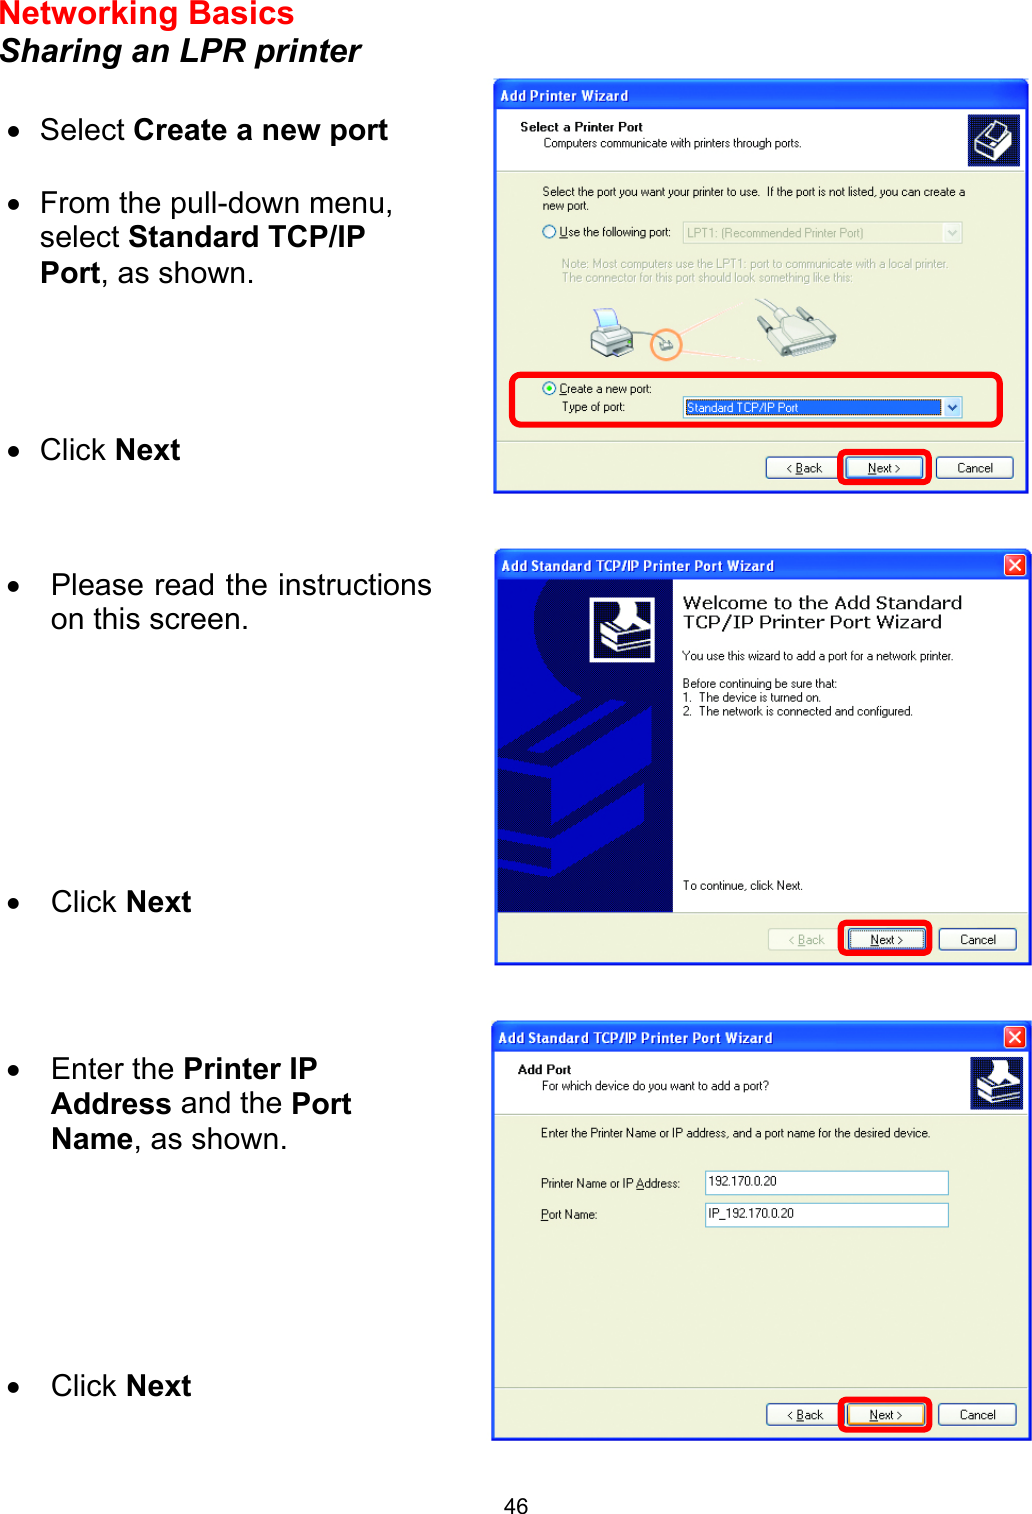  46Networking Basics  Sharing an LPR printer       •  Select Create a new port  •  From the pull-down menu, select Standard TCP/IP Port, as shown. •  Click Next   •  Please read the instructionson this screen. •  Click Next •  Enter the Printer IP Address and the Port Name, as shown.       •  Click Next 